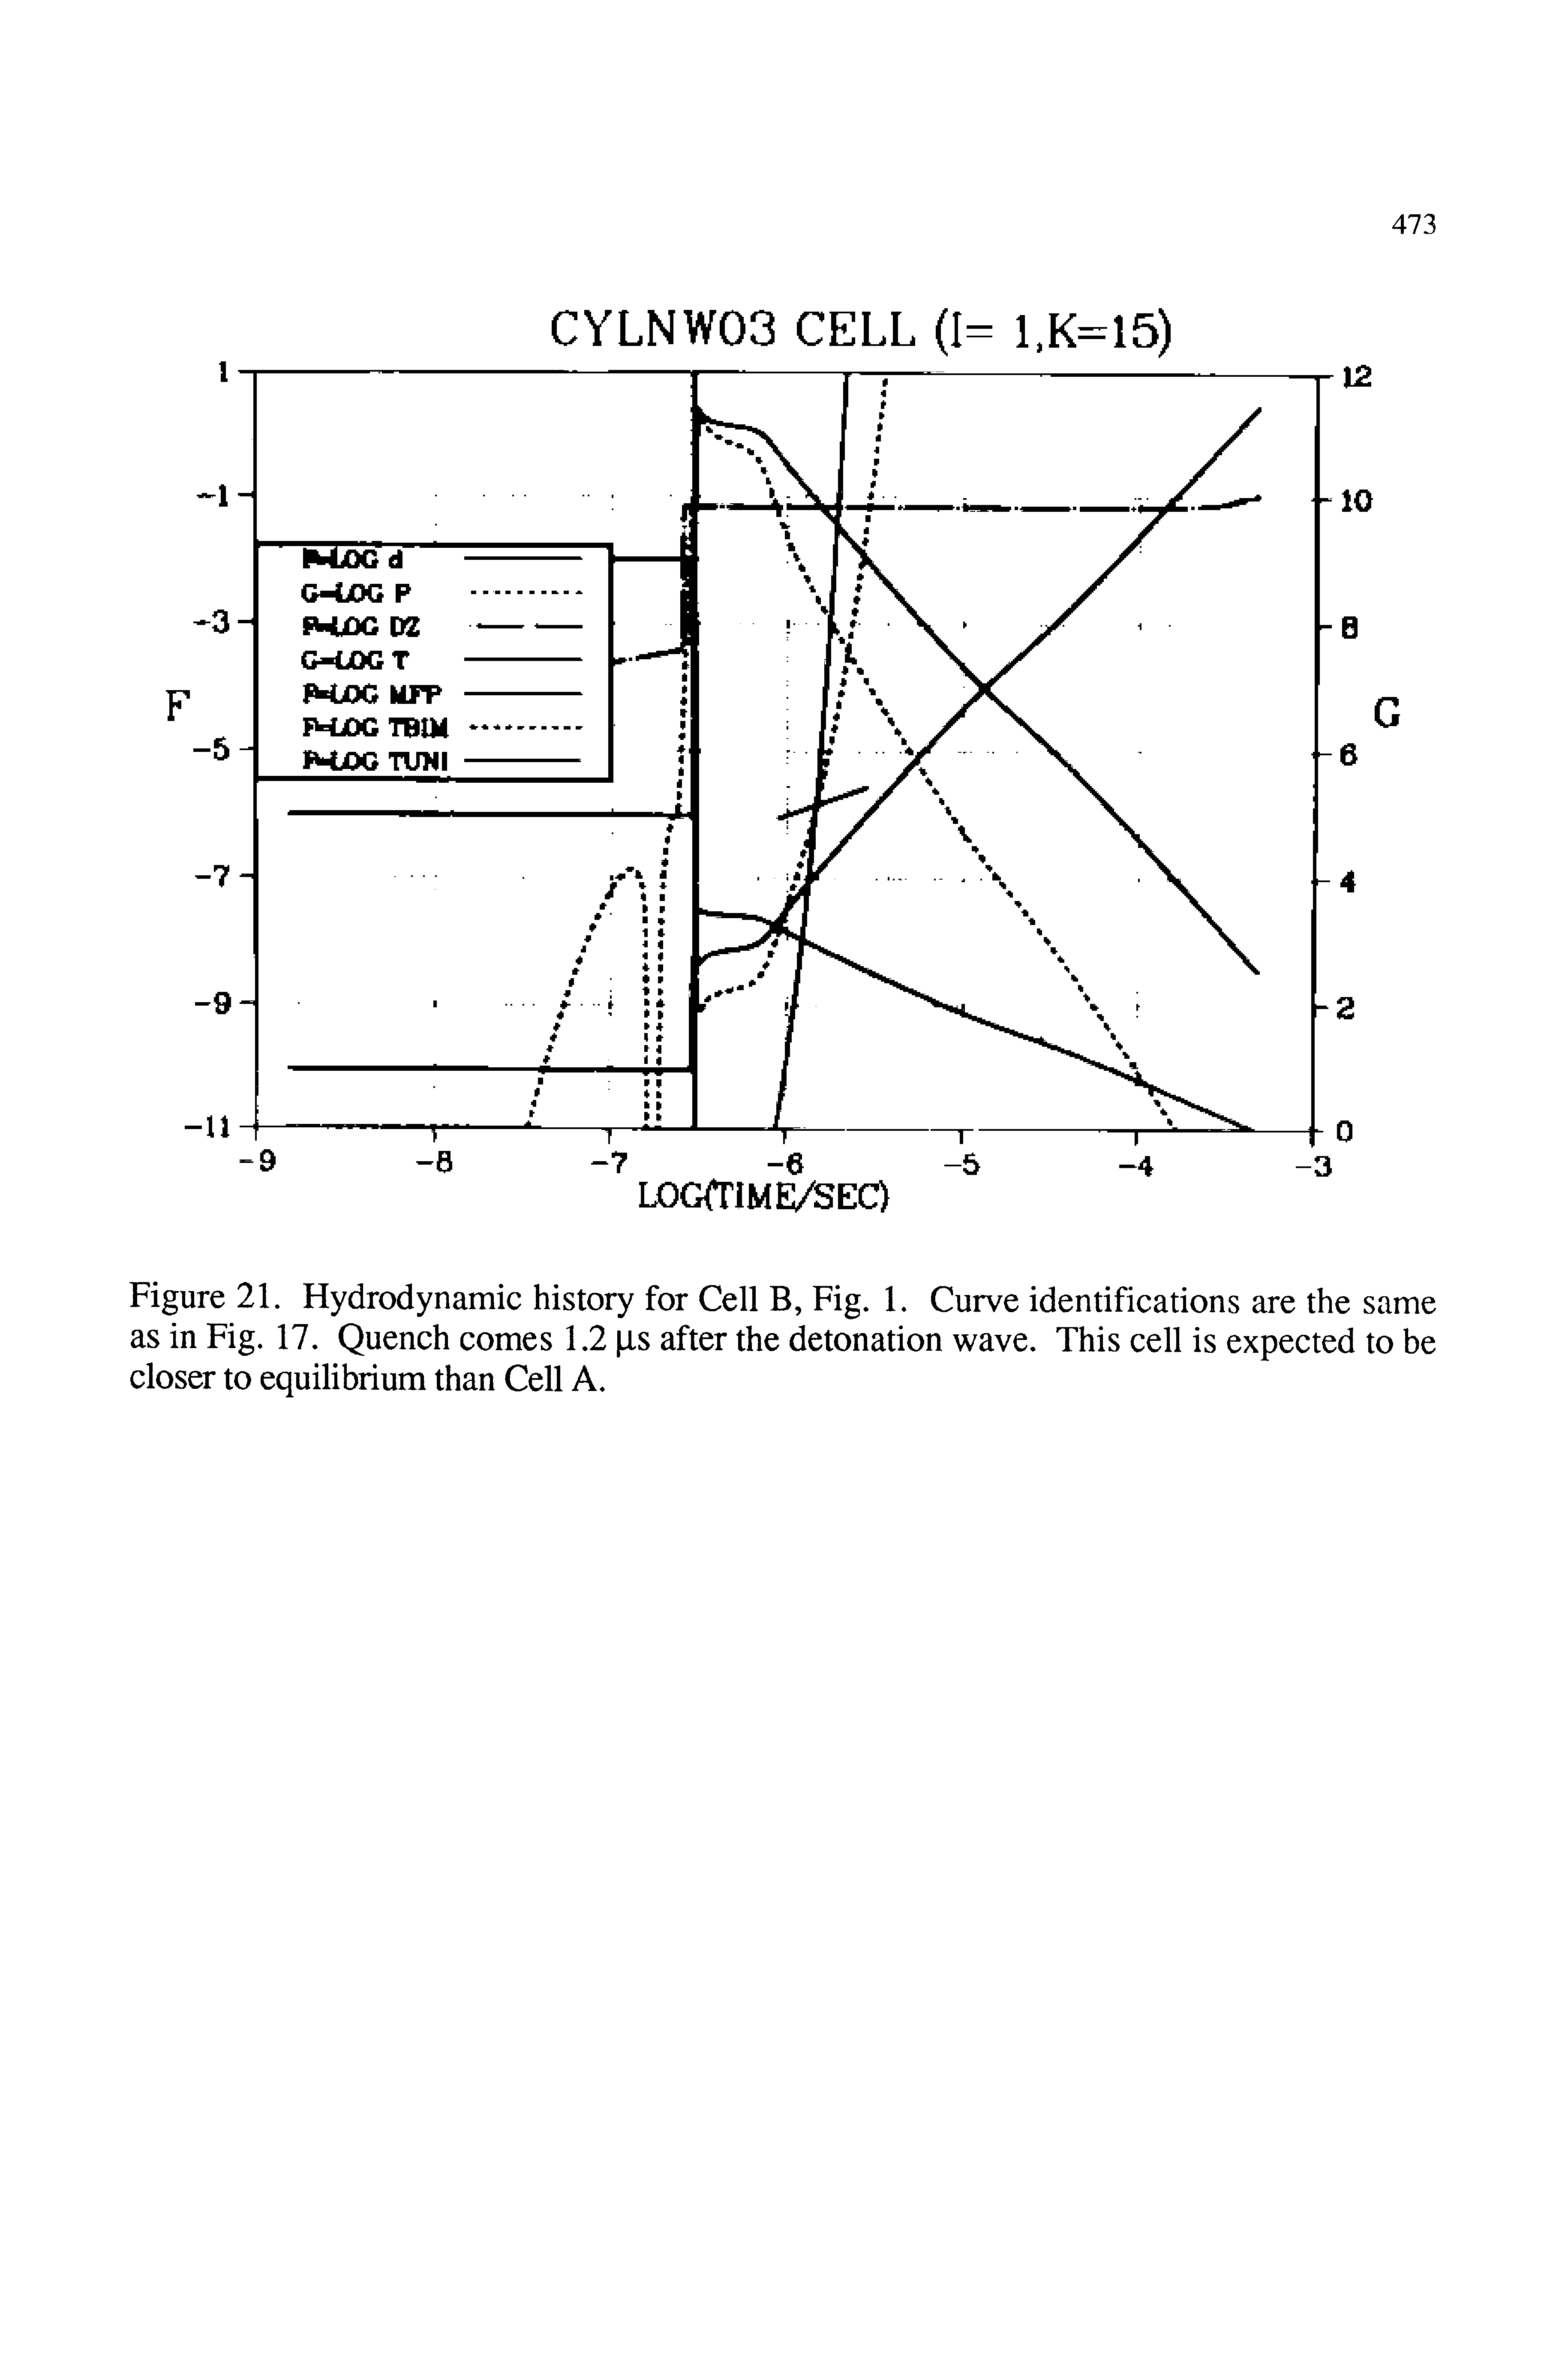 Figure 21. Hydrodynamic history for Cell B, Fig. 1. Curve identifications are the same as in Fig. 17. Quench comes 1.2 is after the detonation wave. This cell is expected to be closer to equilibrium than Cell A.